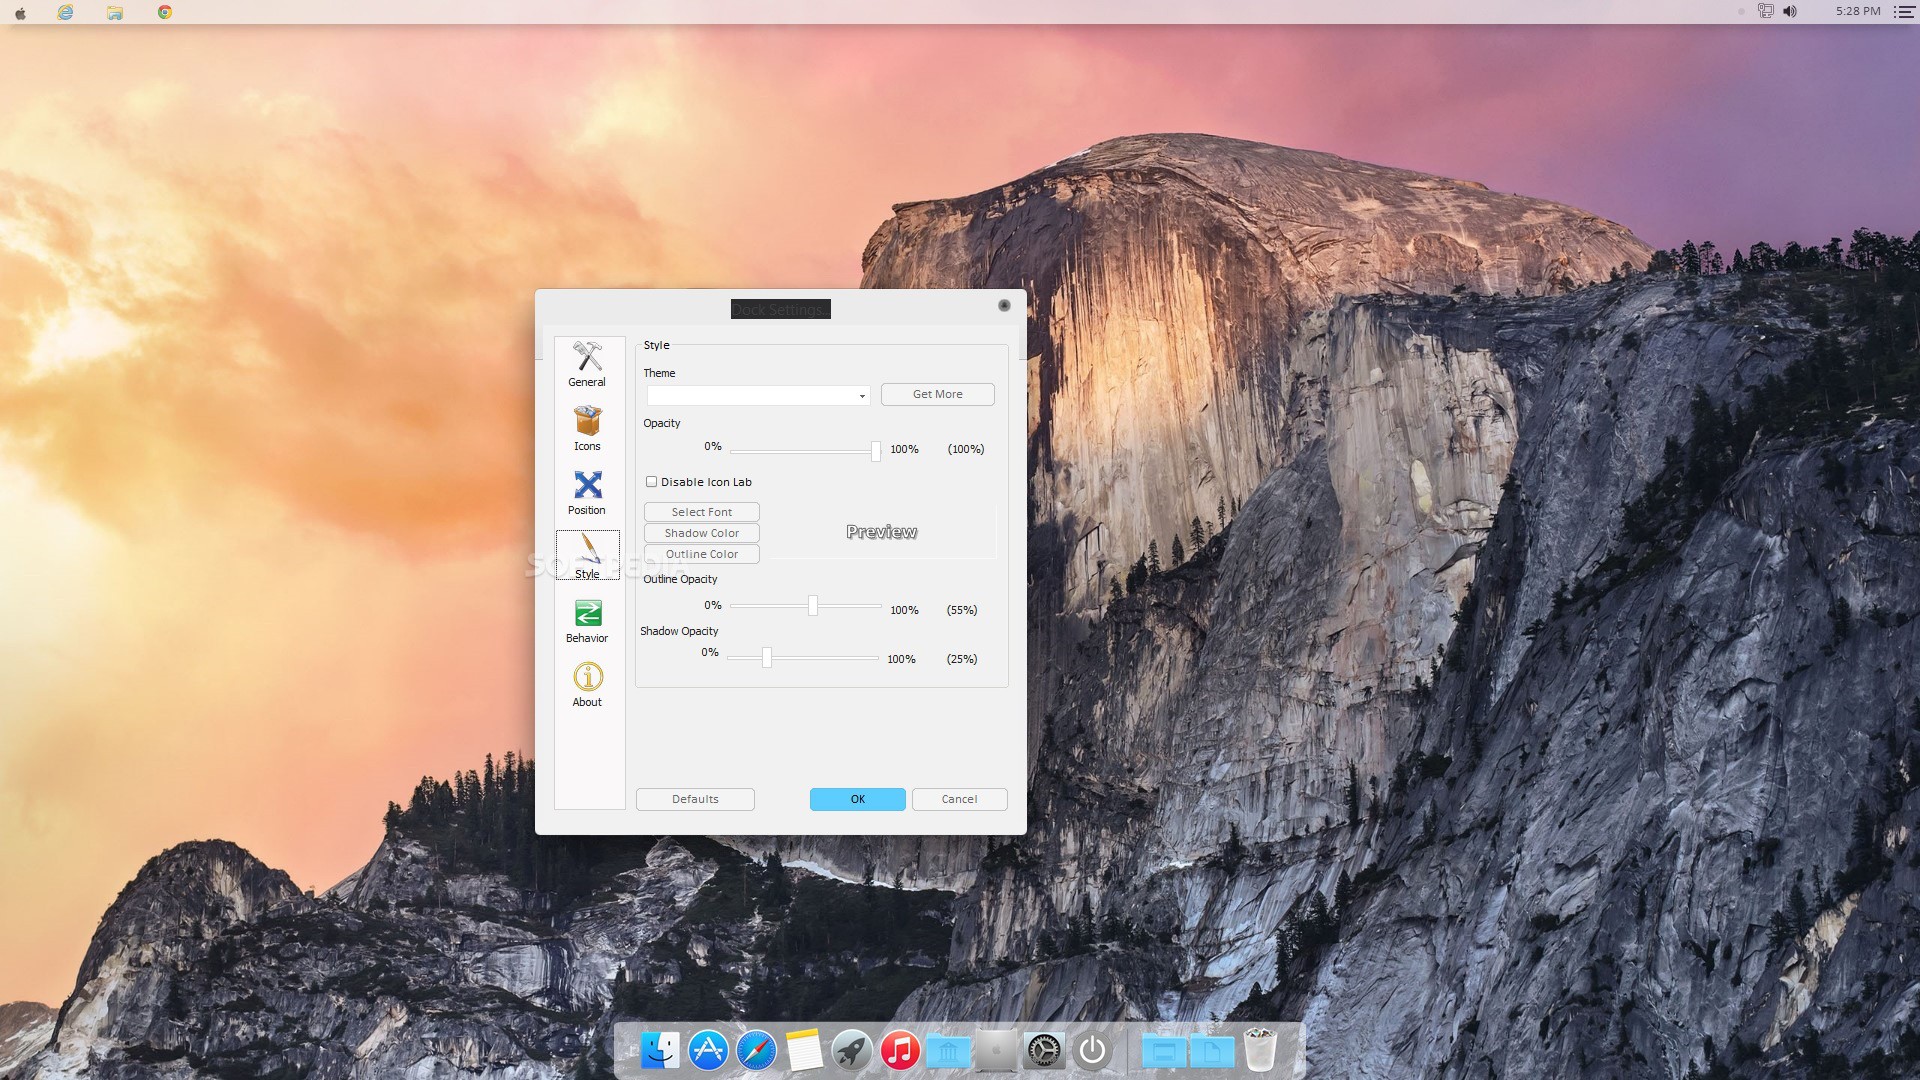 download os x yosemite 10.10 or later